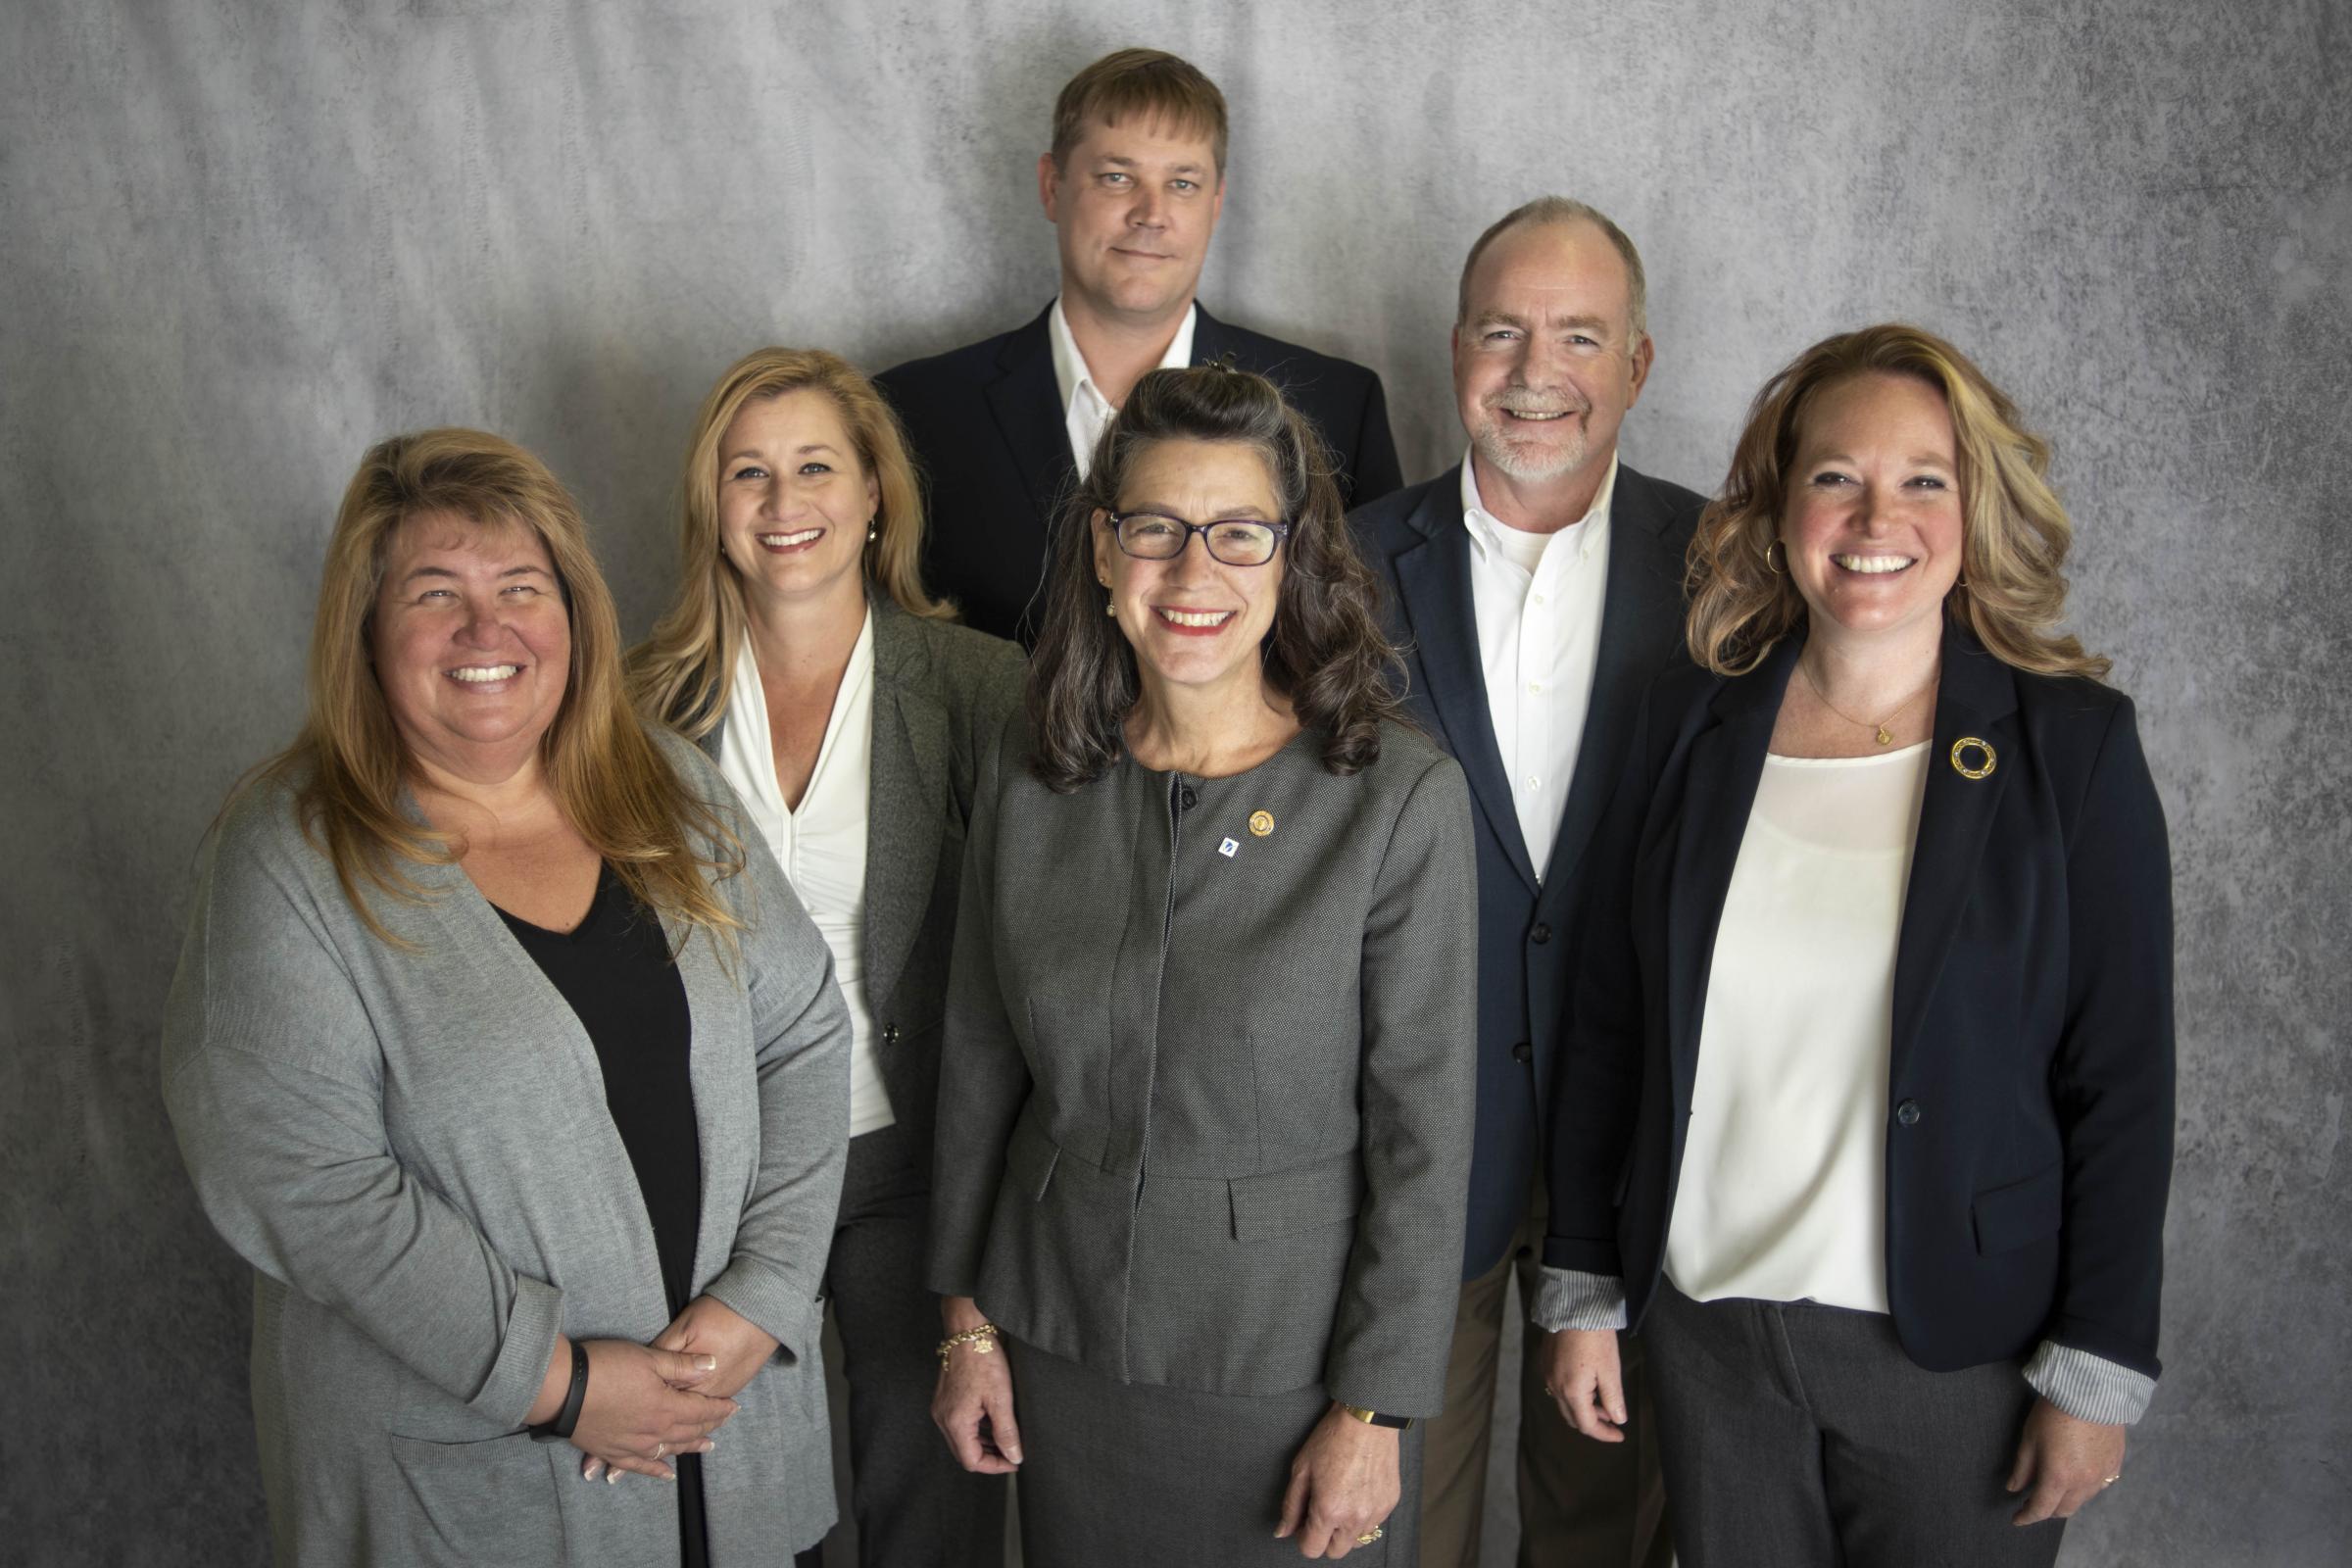 The Port Authority staff, from left to right: Kelly Greene, Jennifer Klus, Brian Phillips, Beth Huber, Dan Evers, and Ruth Brindle.